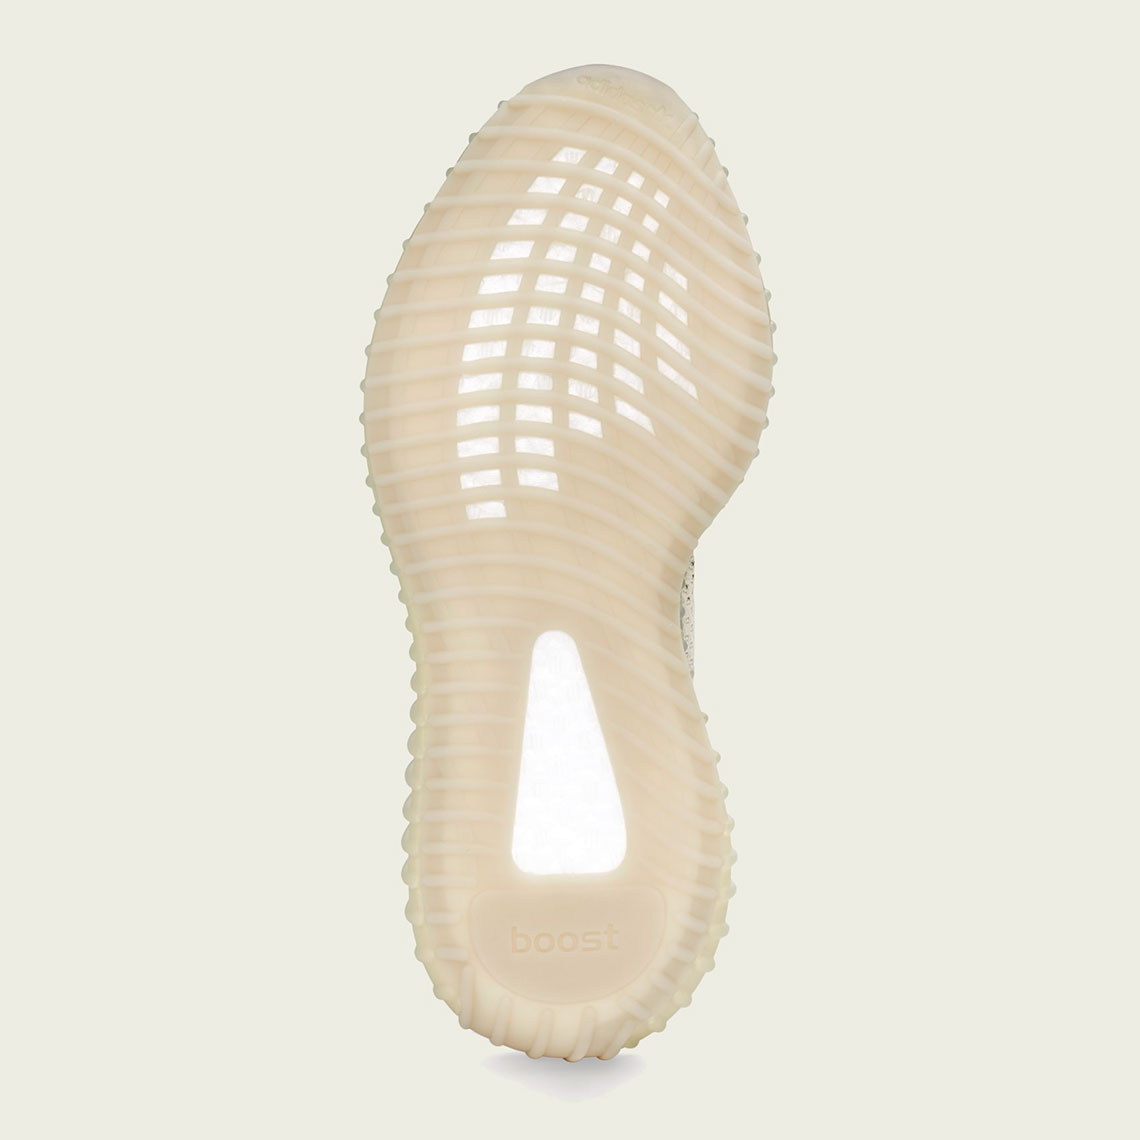 adidas Yeezy Boost 350 v2 FX9028 2022 Release Date | SneakerNews.com